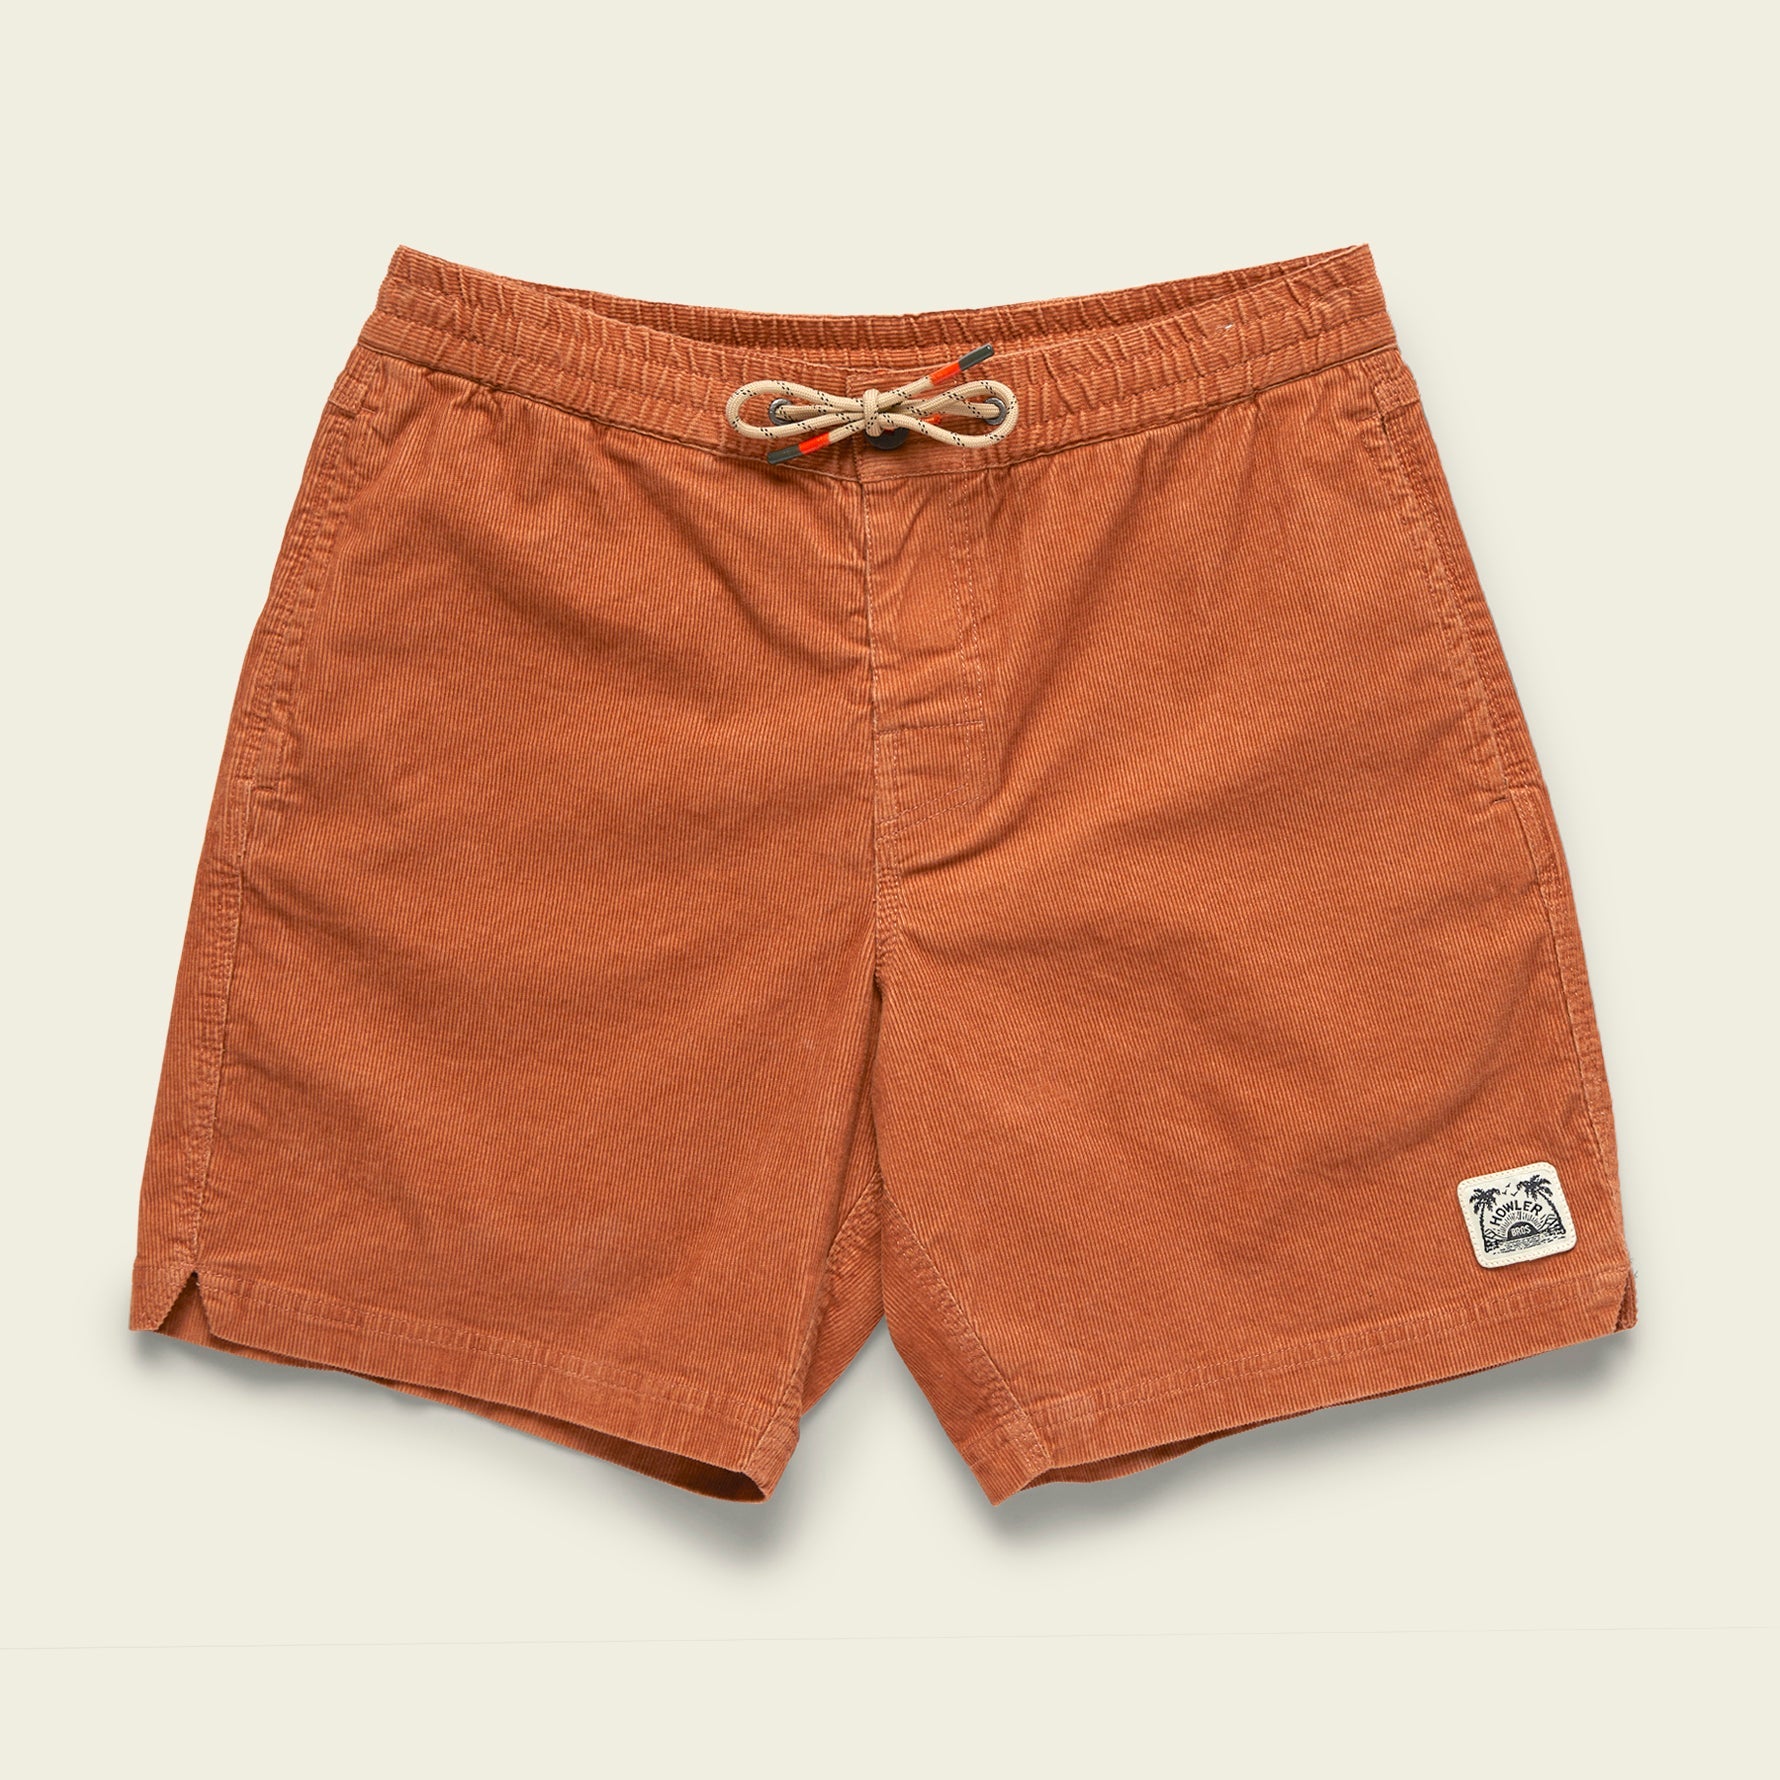 Howler Brothers Pressure Drop Cord Shorts - 88 Gear